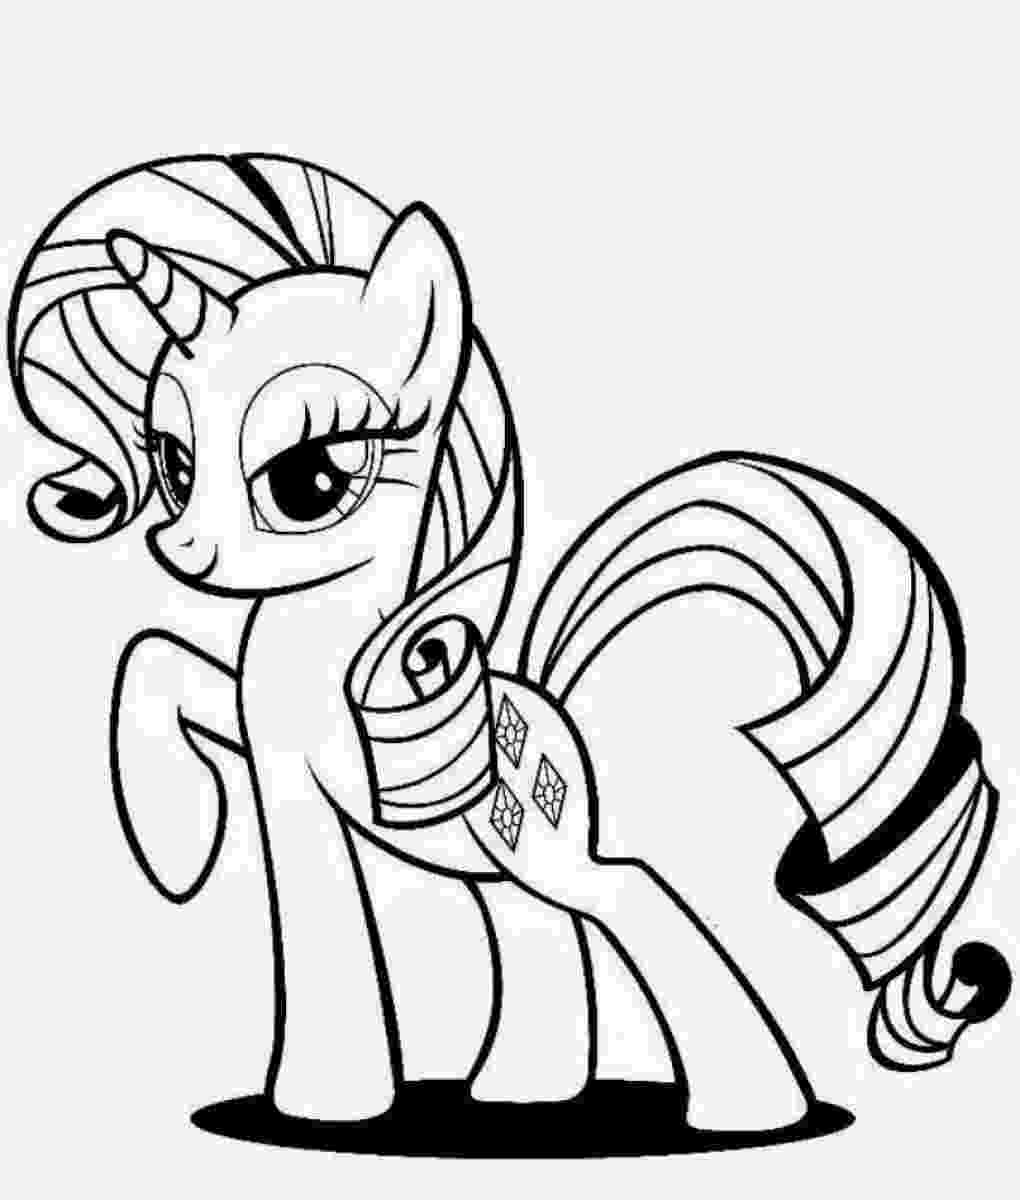 my little pony rarity coloring pages rarity coloring page free my little pony friendship is pony little pages rarity coloring my 